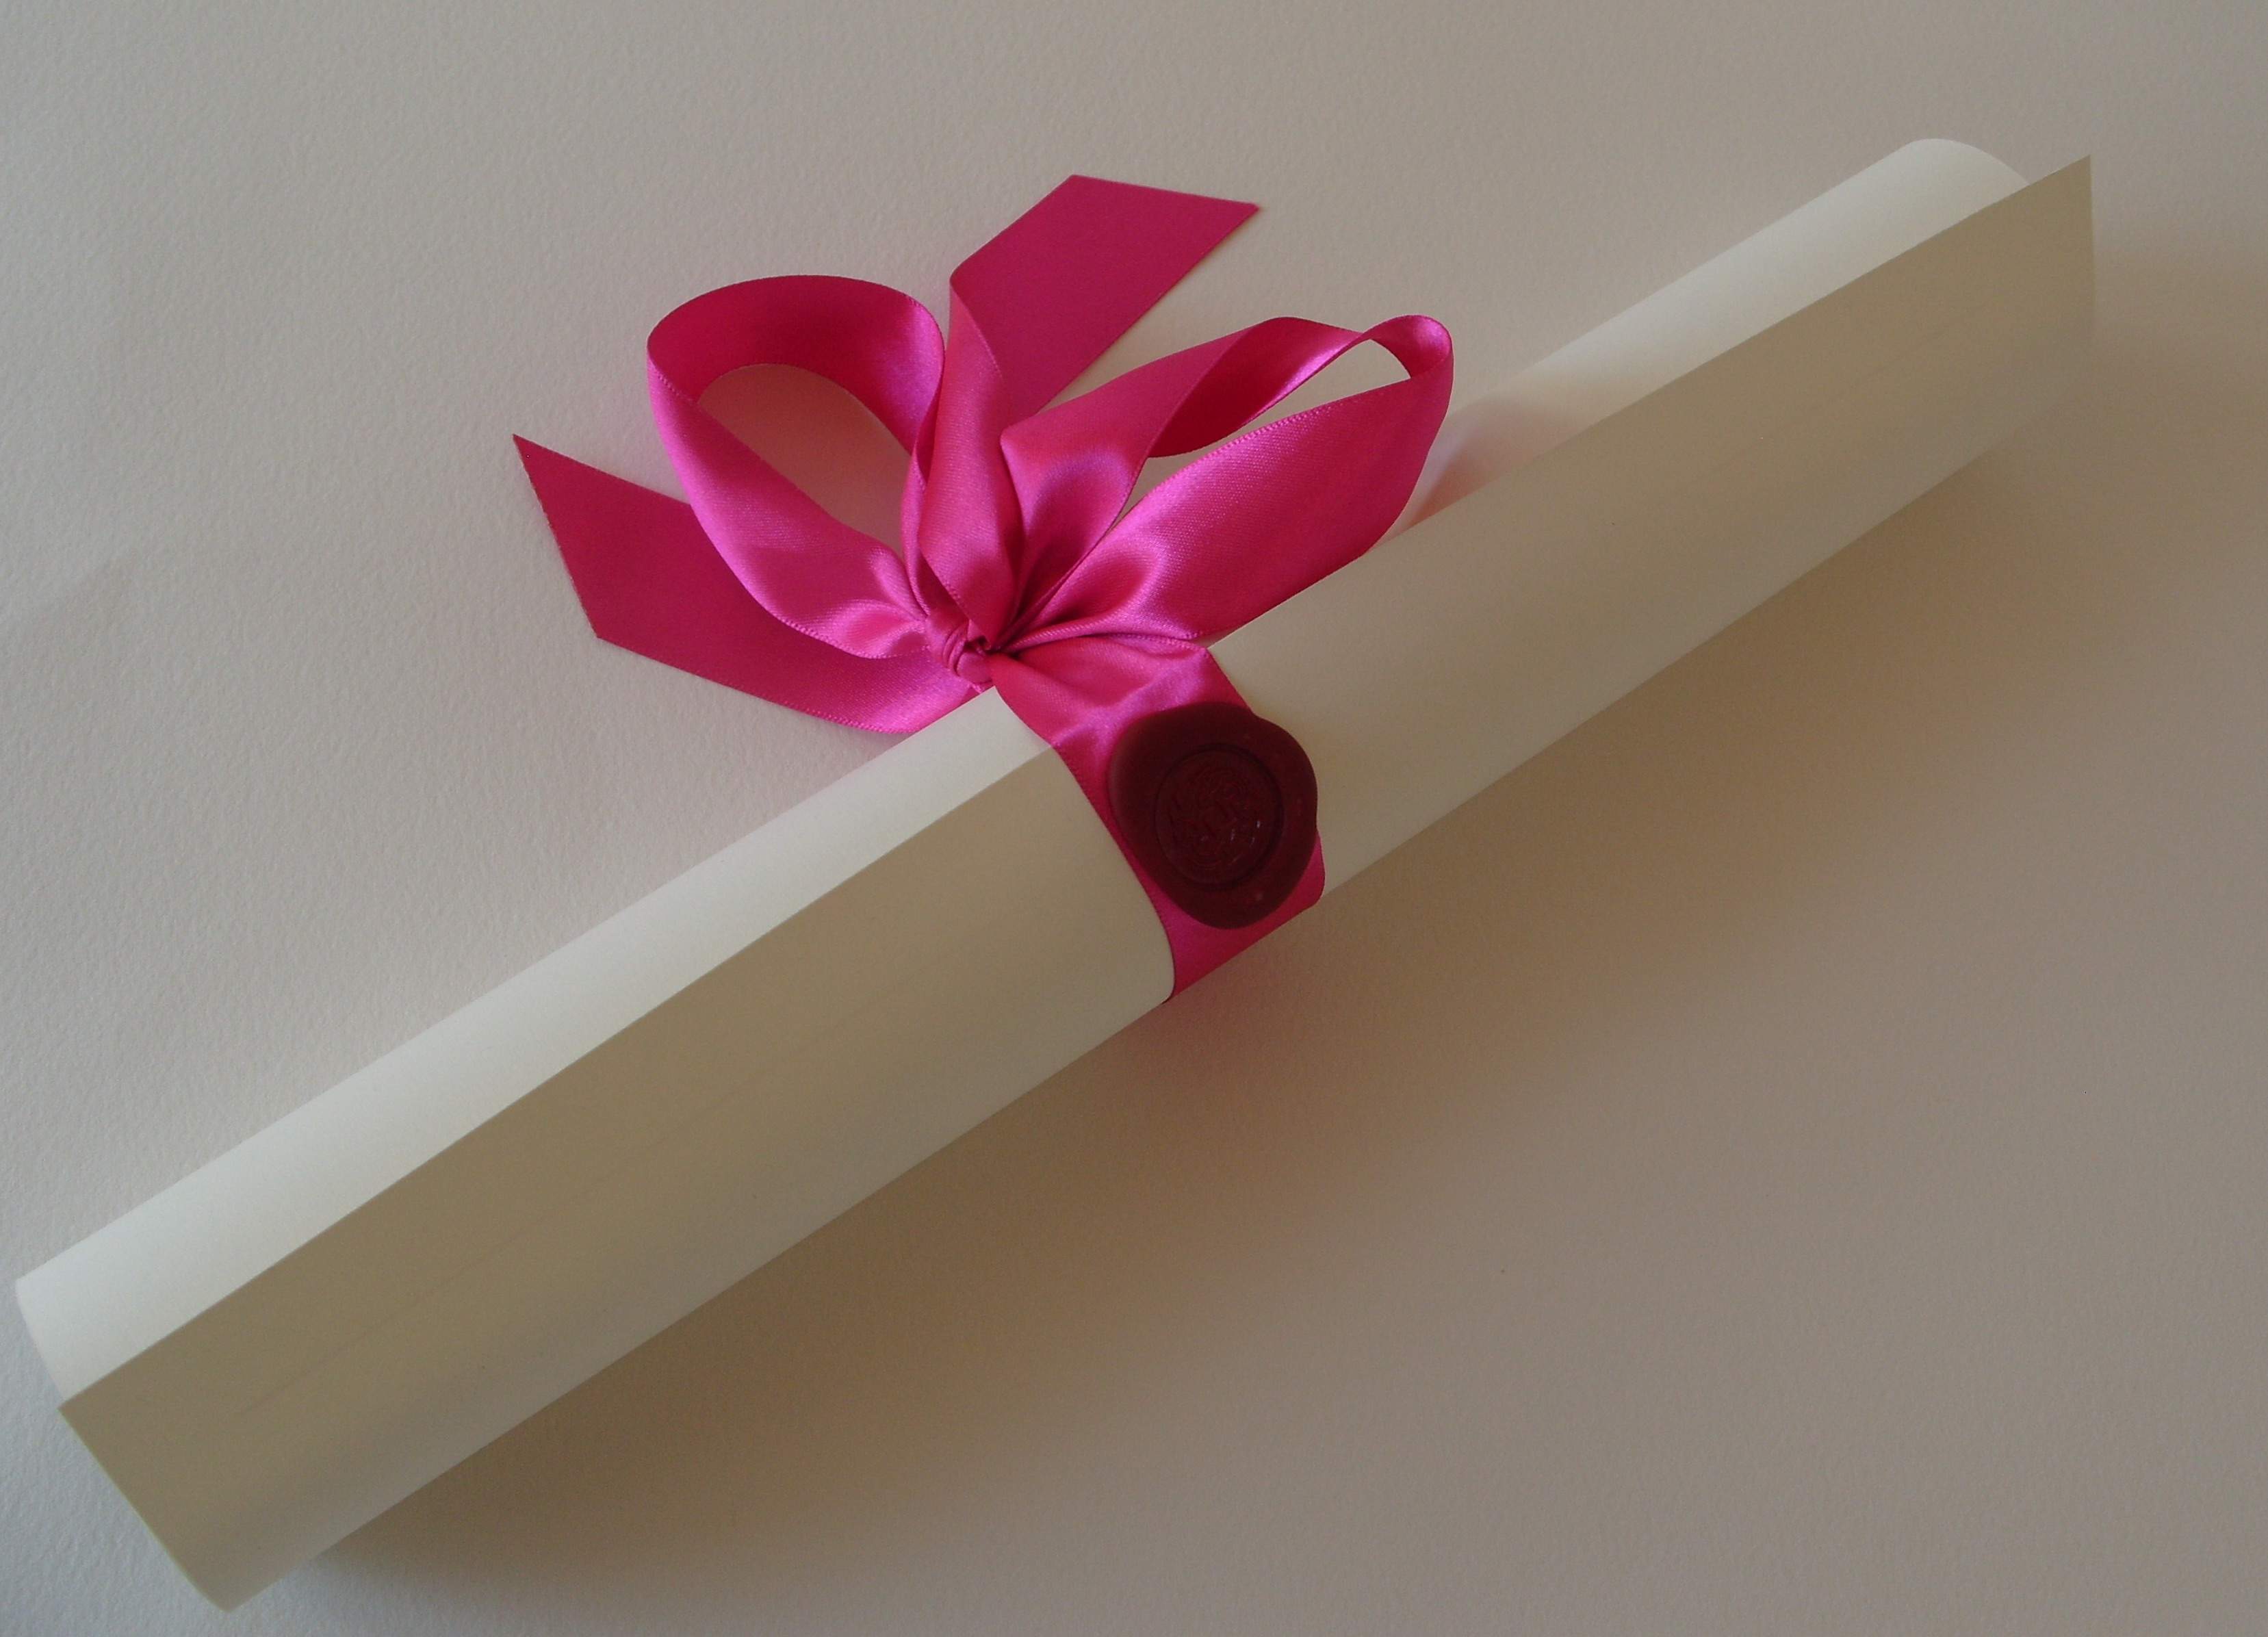 Prepared as a rolled scroll and bound with a ribbon and wax seal. A gift or special presentation.